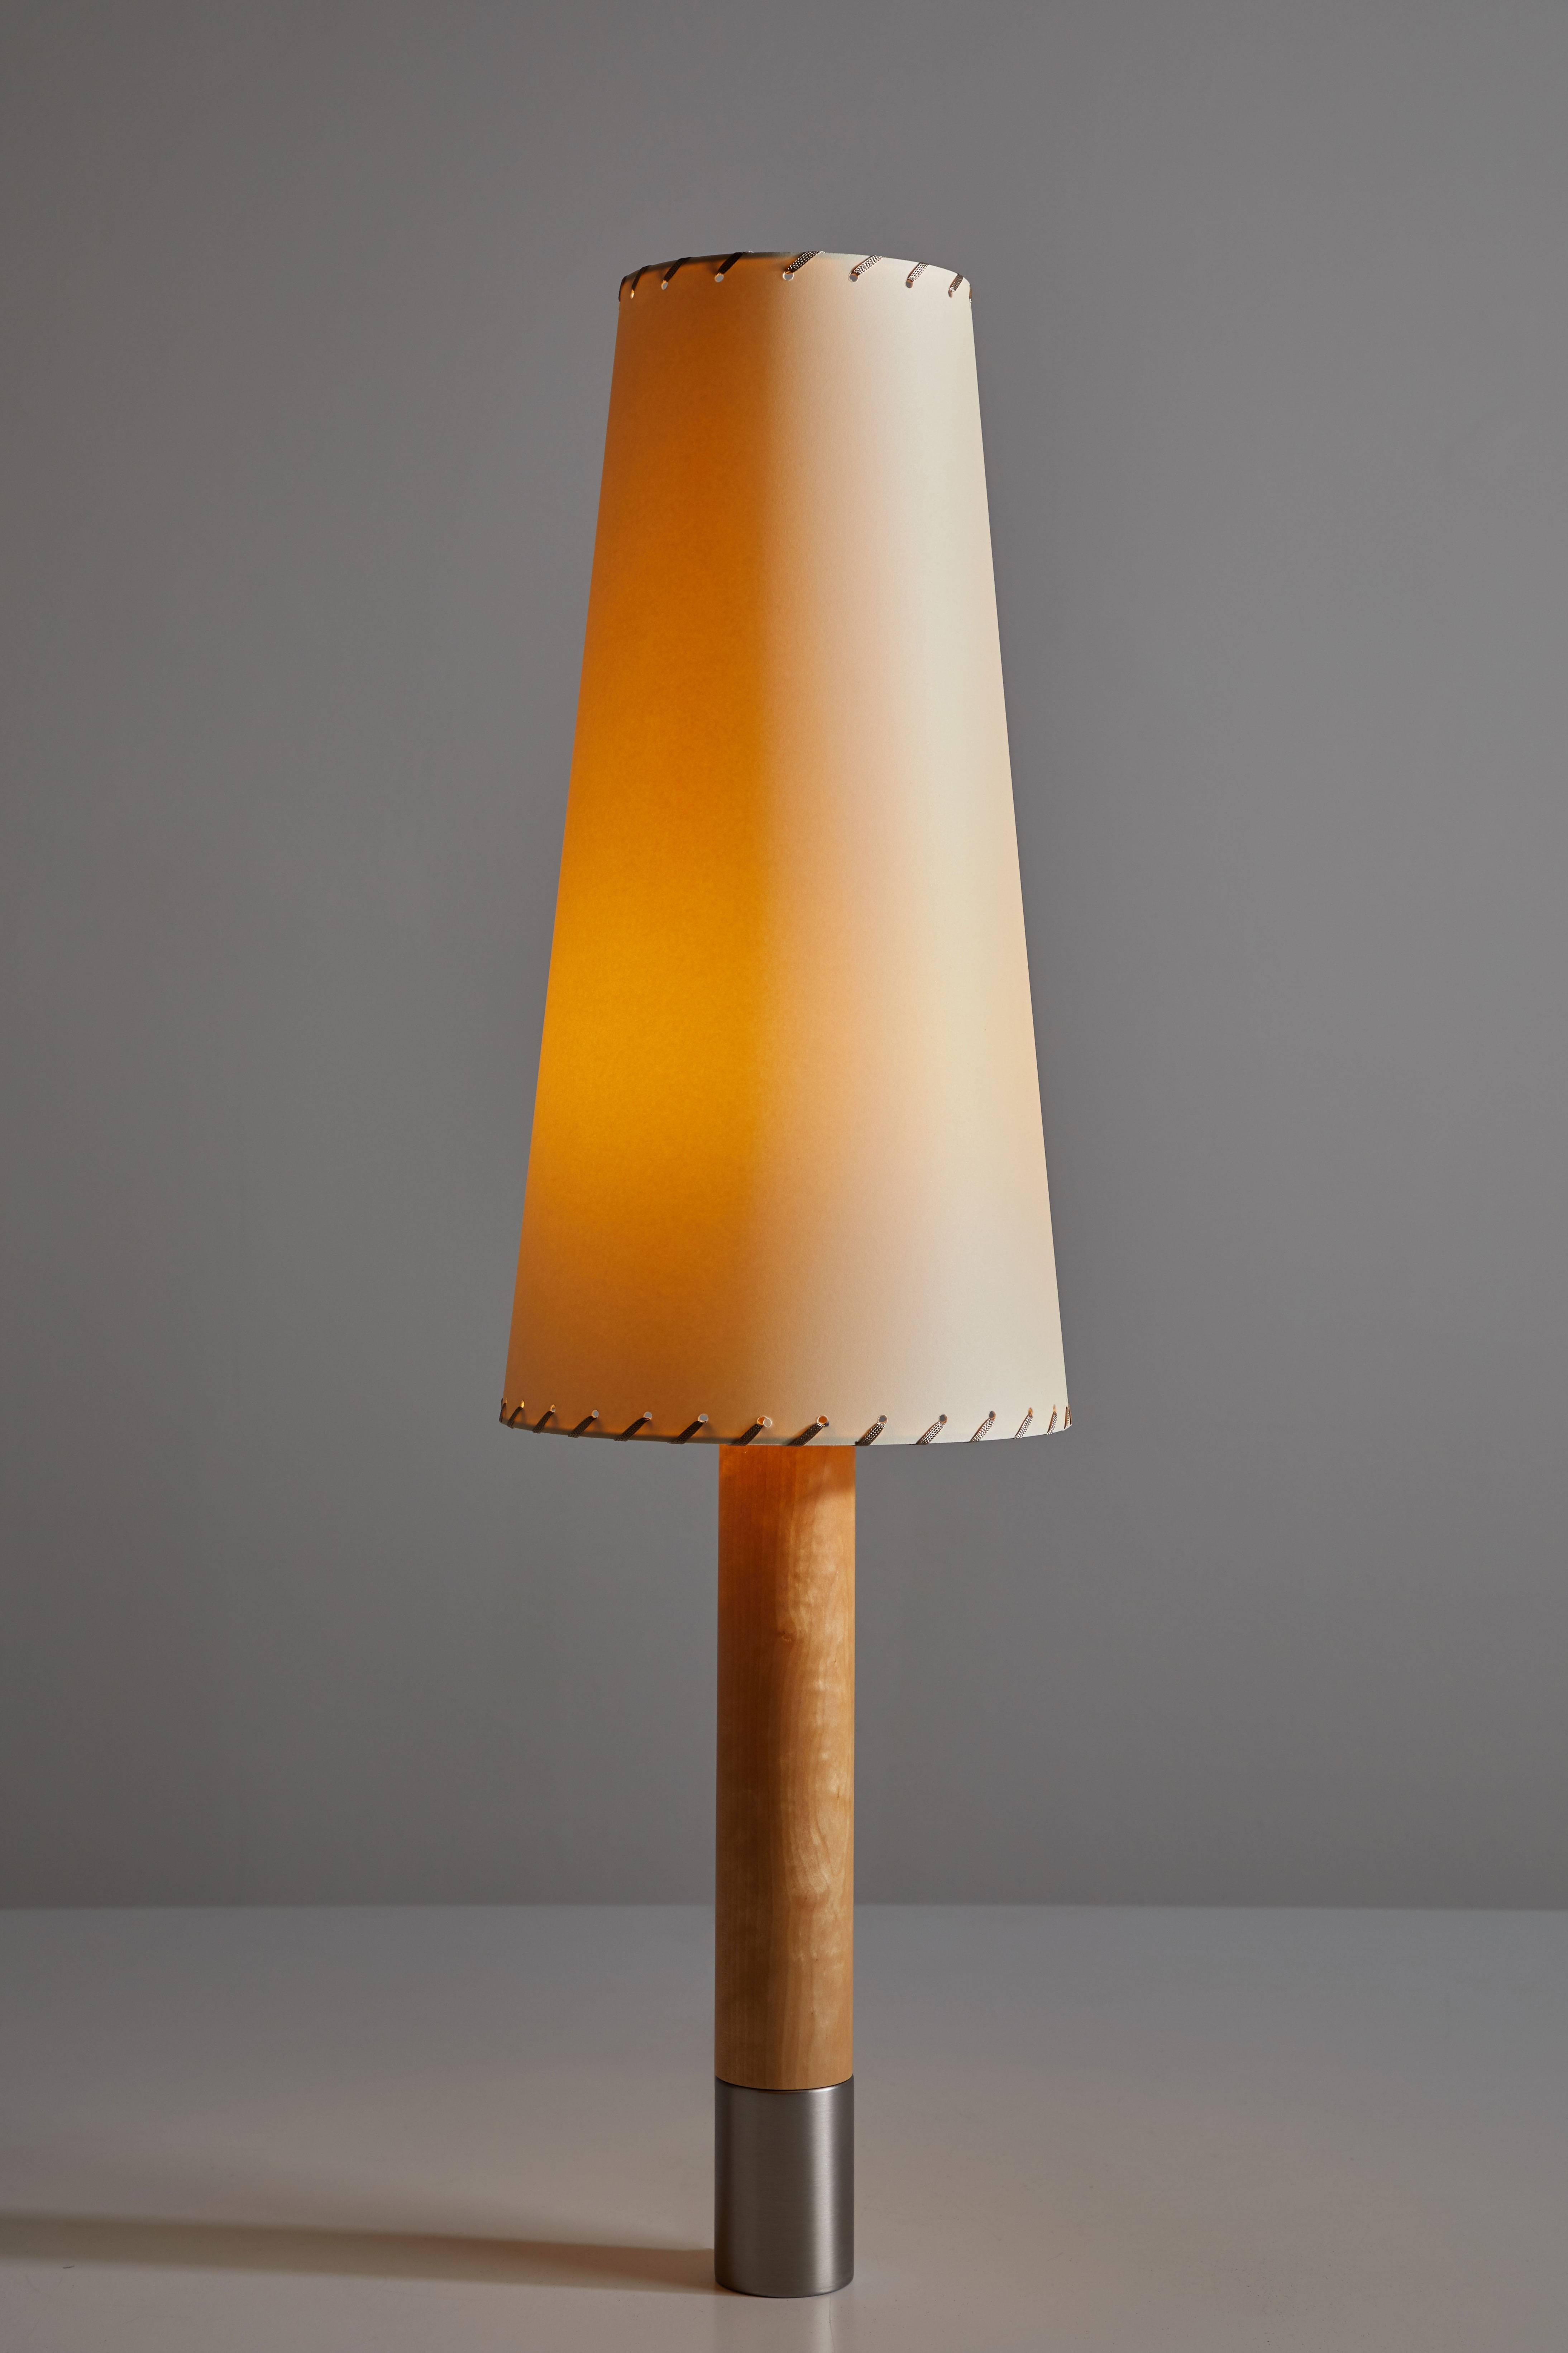 Básica table lamp by Santiago Roqueta for Santa & Cole originally designed in 1987. The current re-edition is wired for the US. A wooden column, held up by a heavy metal base with the same diameter, supports a range of shades in different shapes and